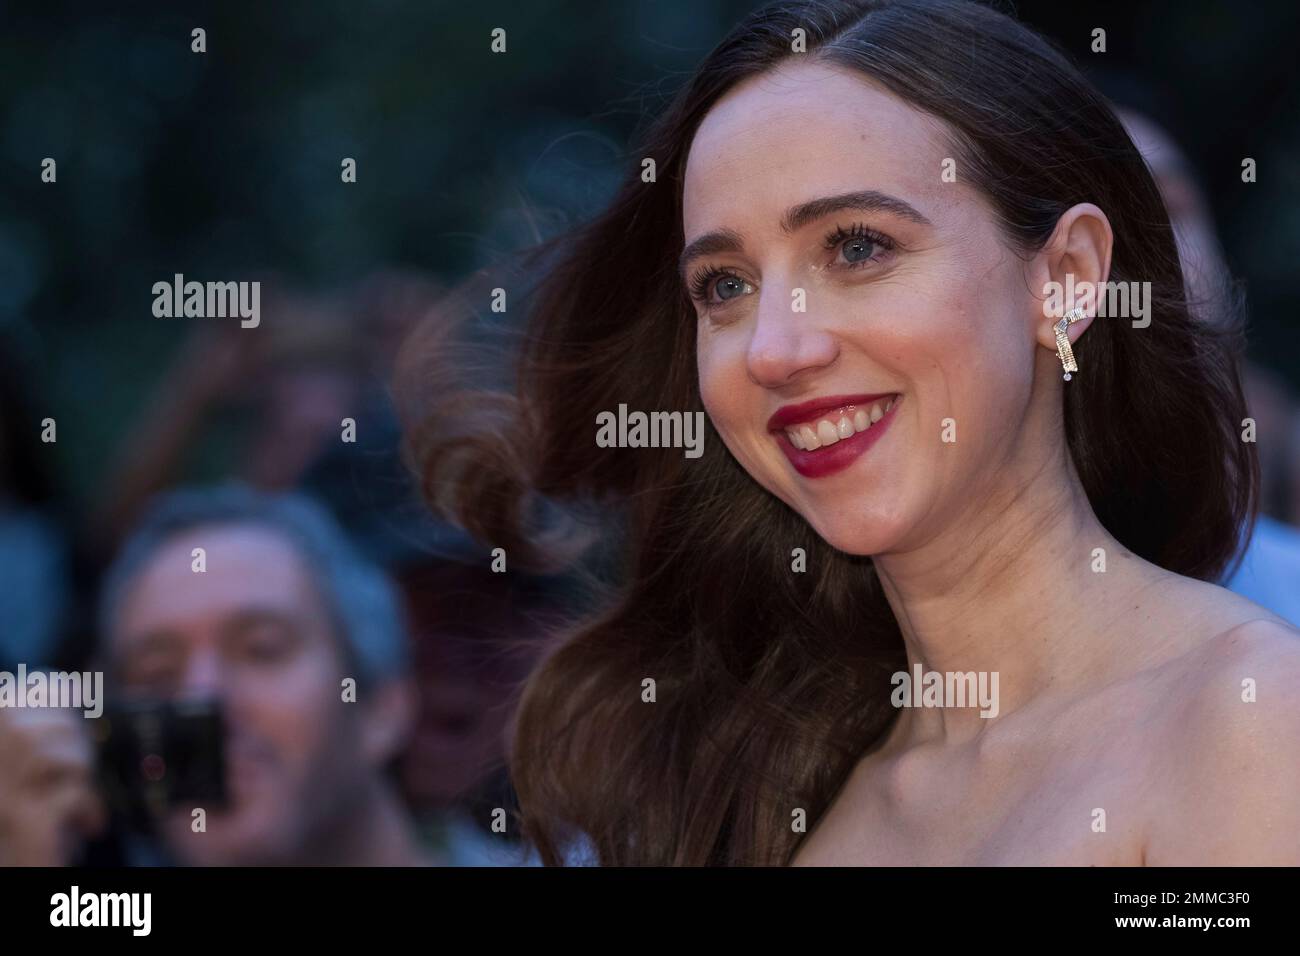 Actress Zoe Kazan Poses For Photographers Upon Arrival At The Premiere Of The Film The Ballad